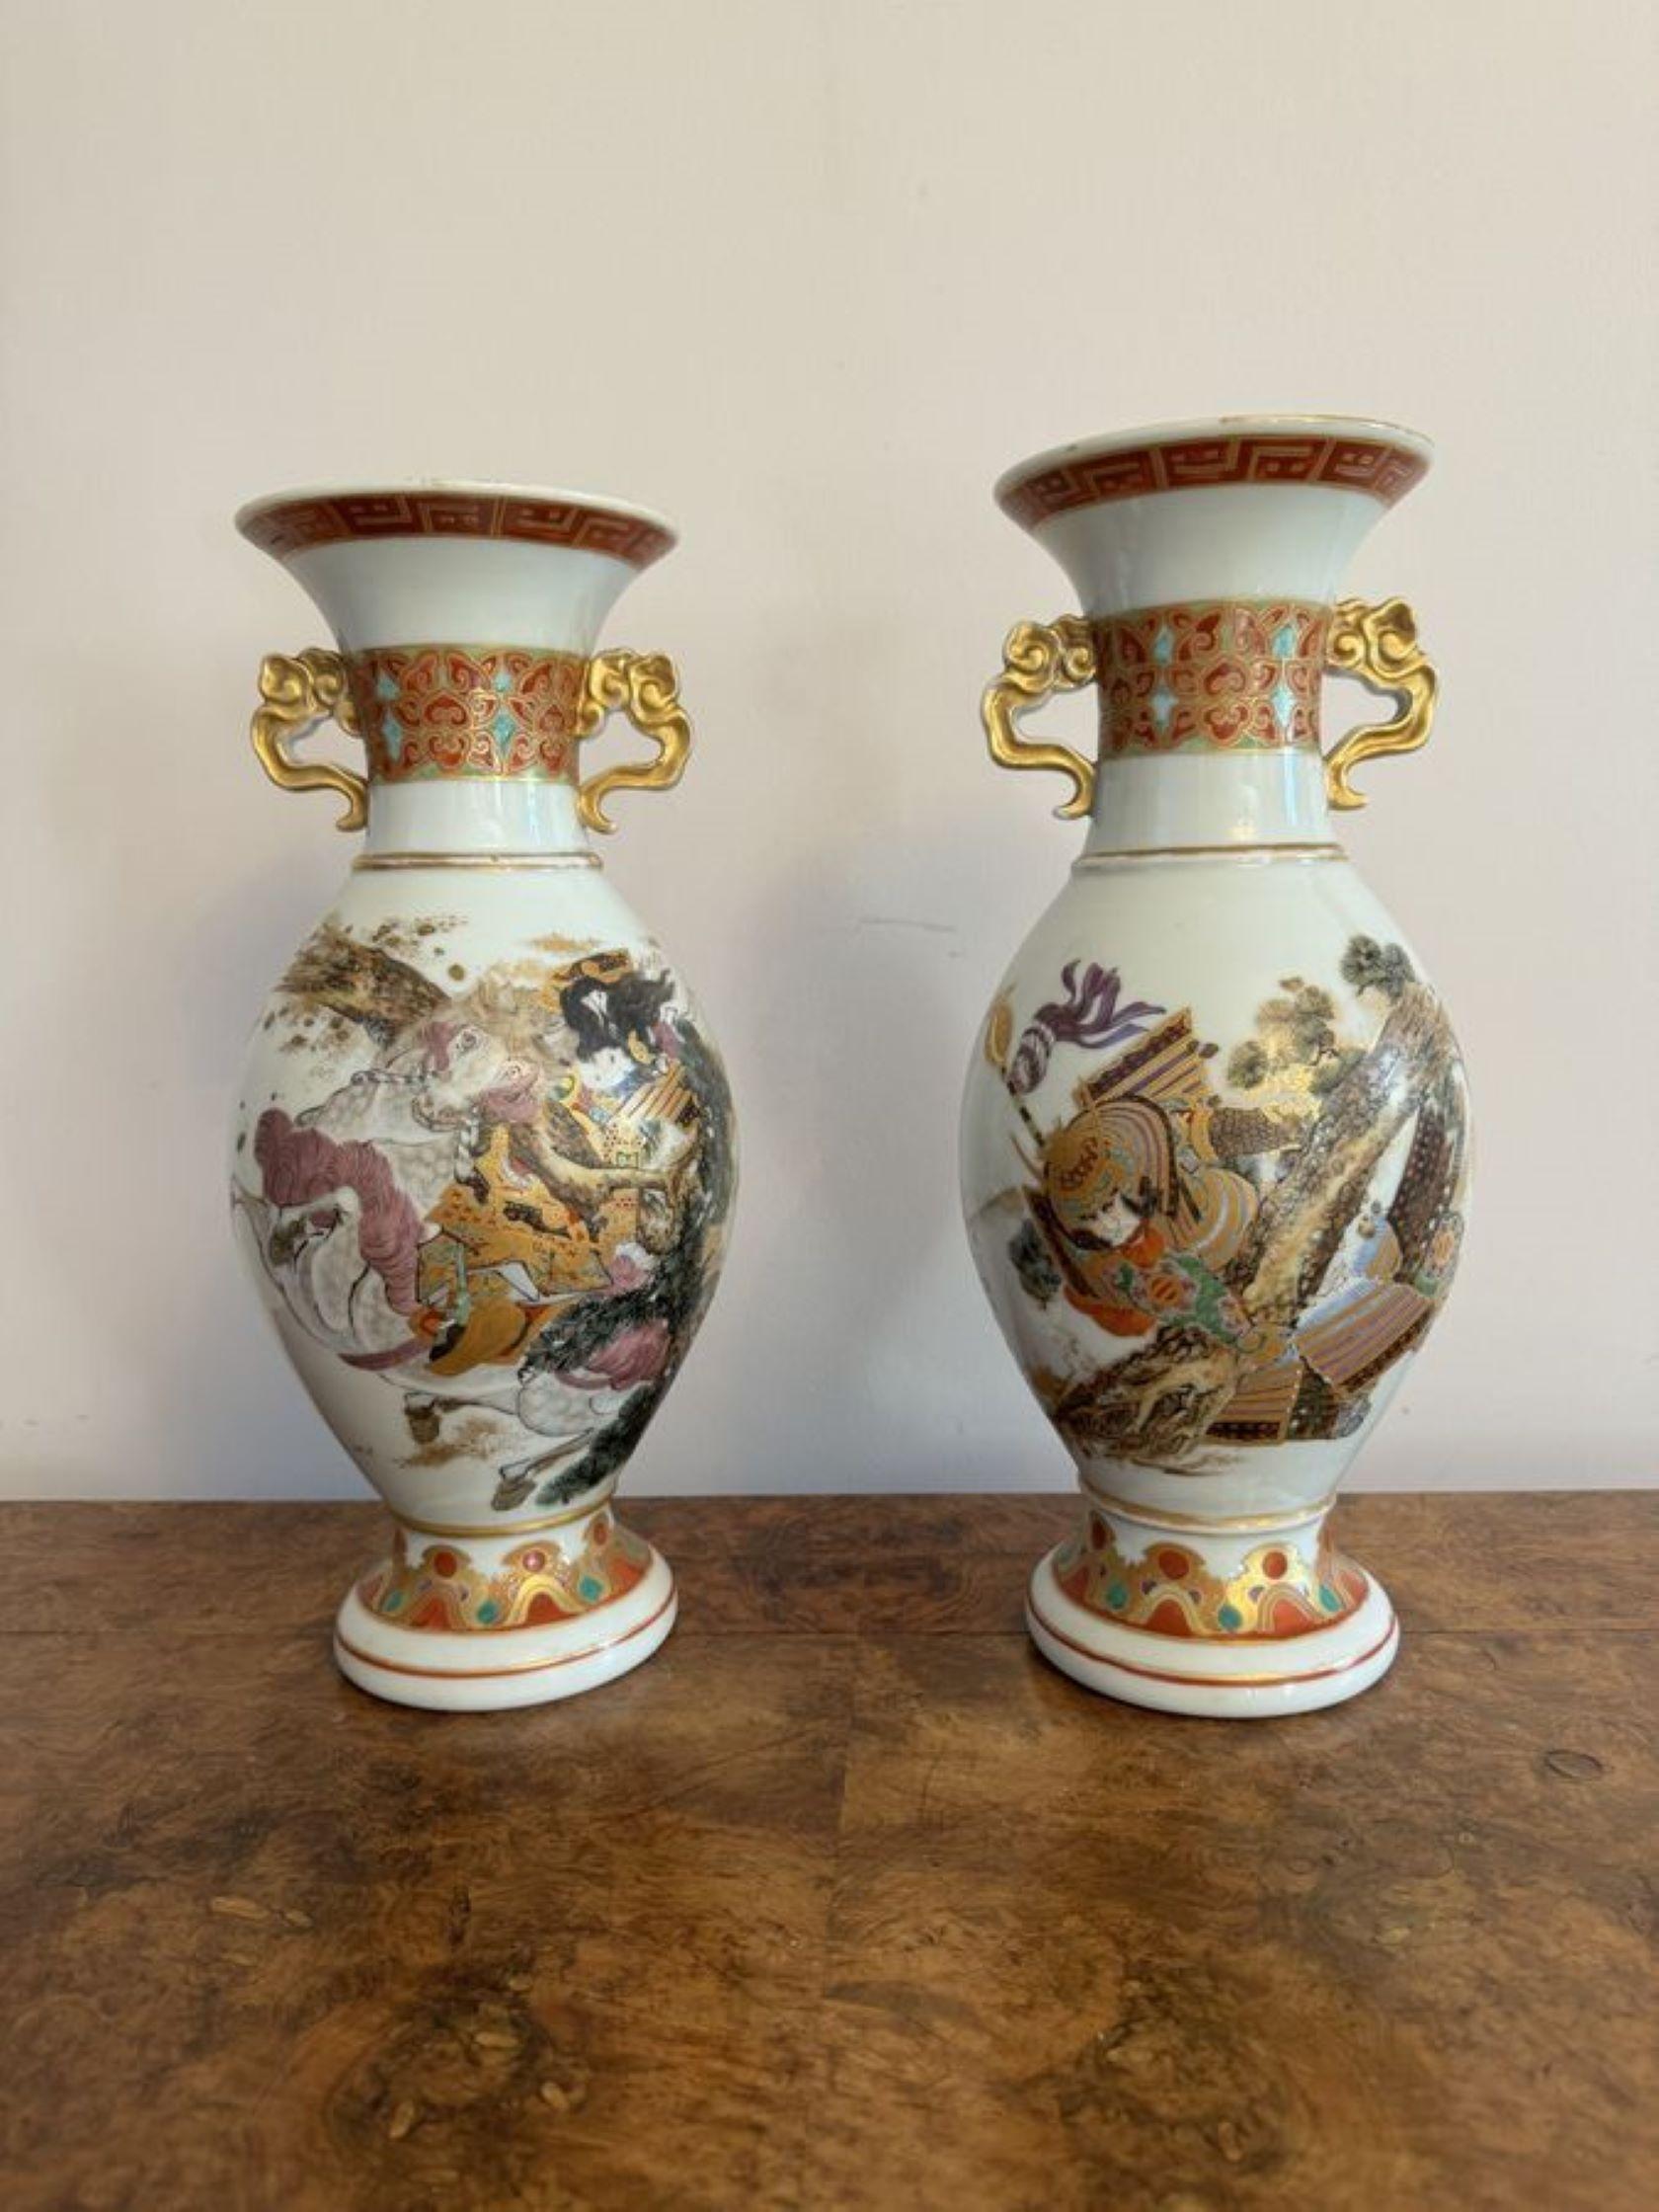 Superb quality pair of antique 19th century porcelain Chinese famille vercv vases, having shaped bodies with gold twin handles to the top, with quality hand painted samurai warriors in wonderful red, blue, white, orange and gold colours, raised on